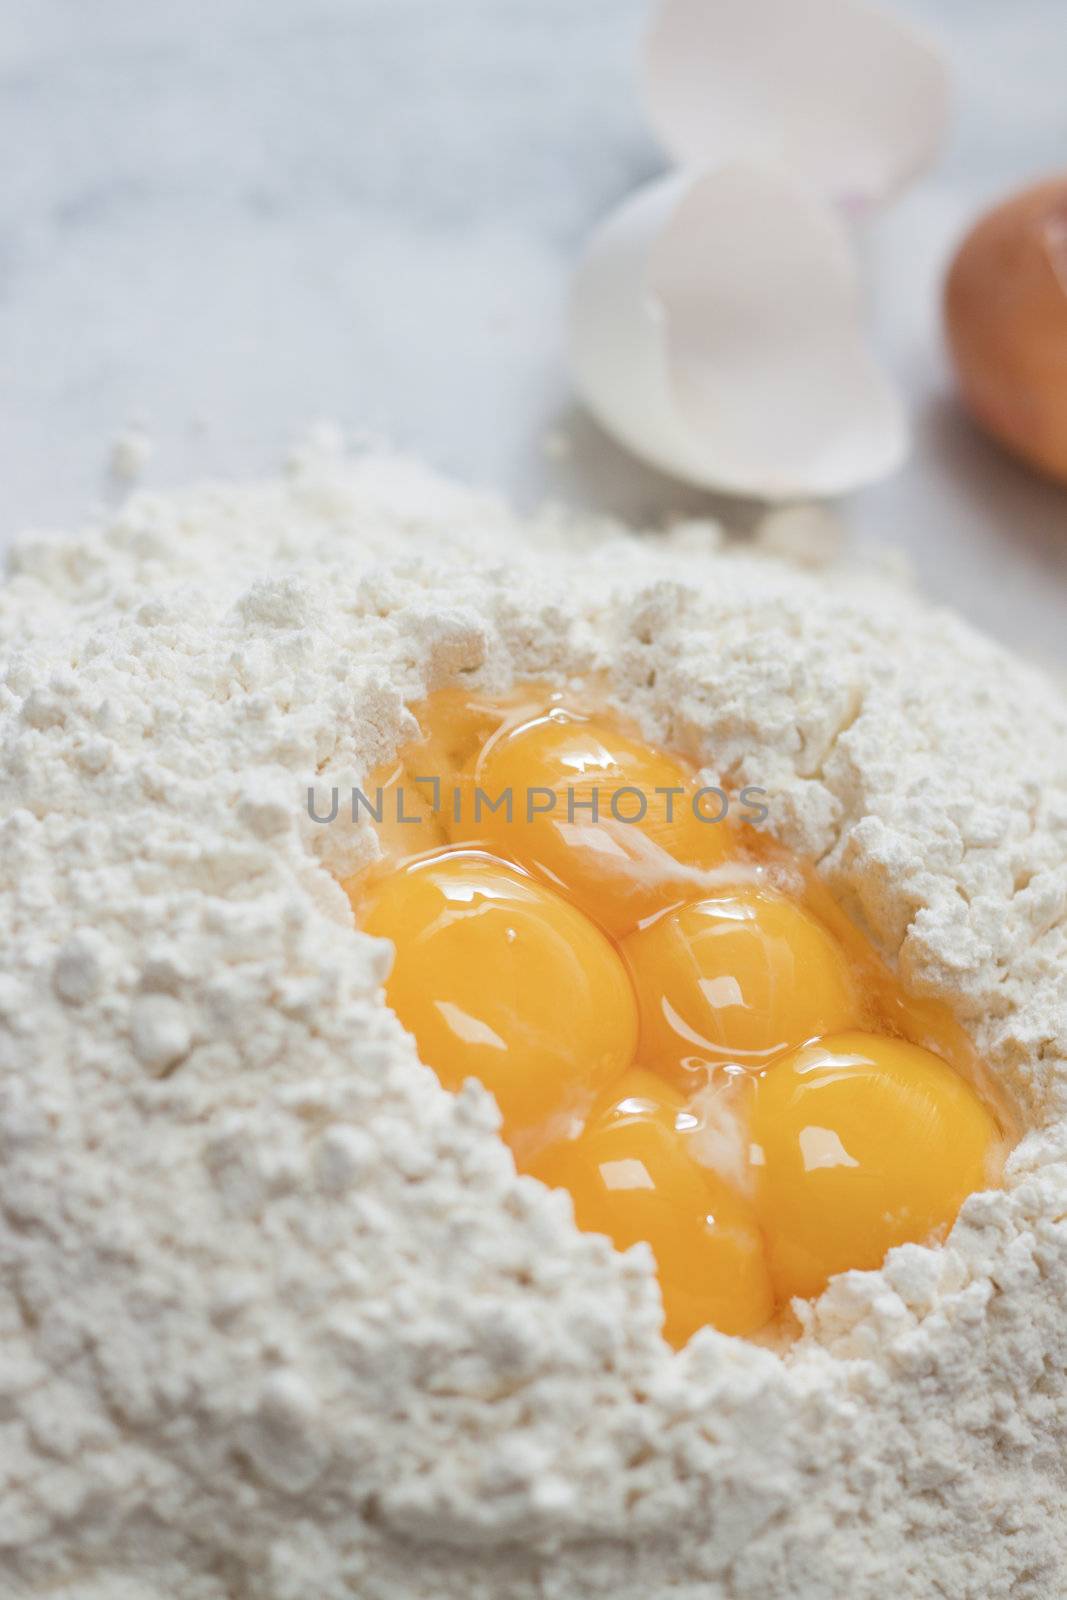 Cracked eggs in flour, cooking or baking